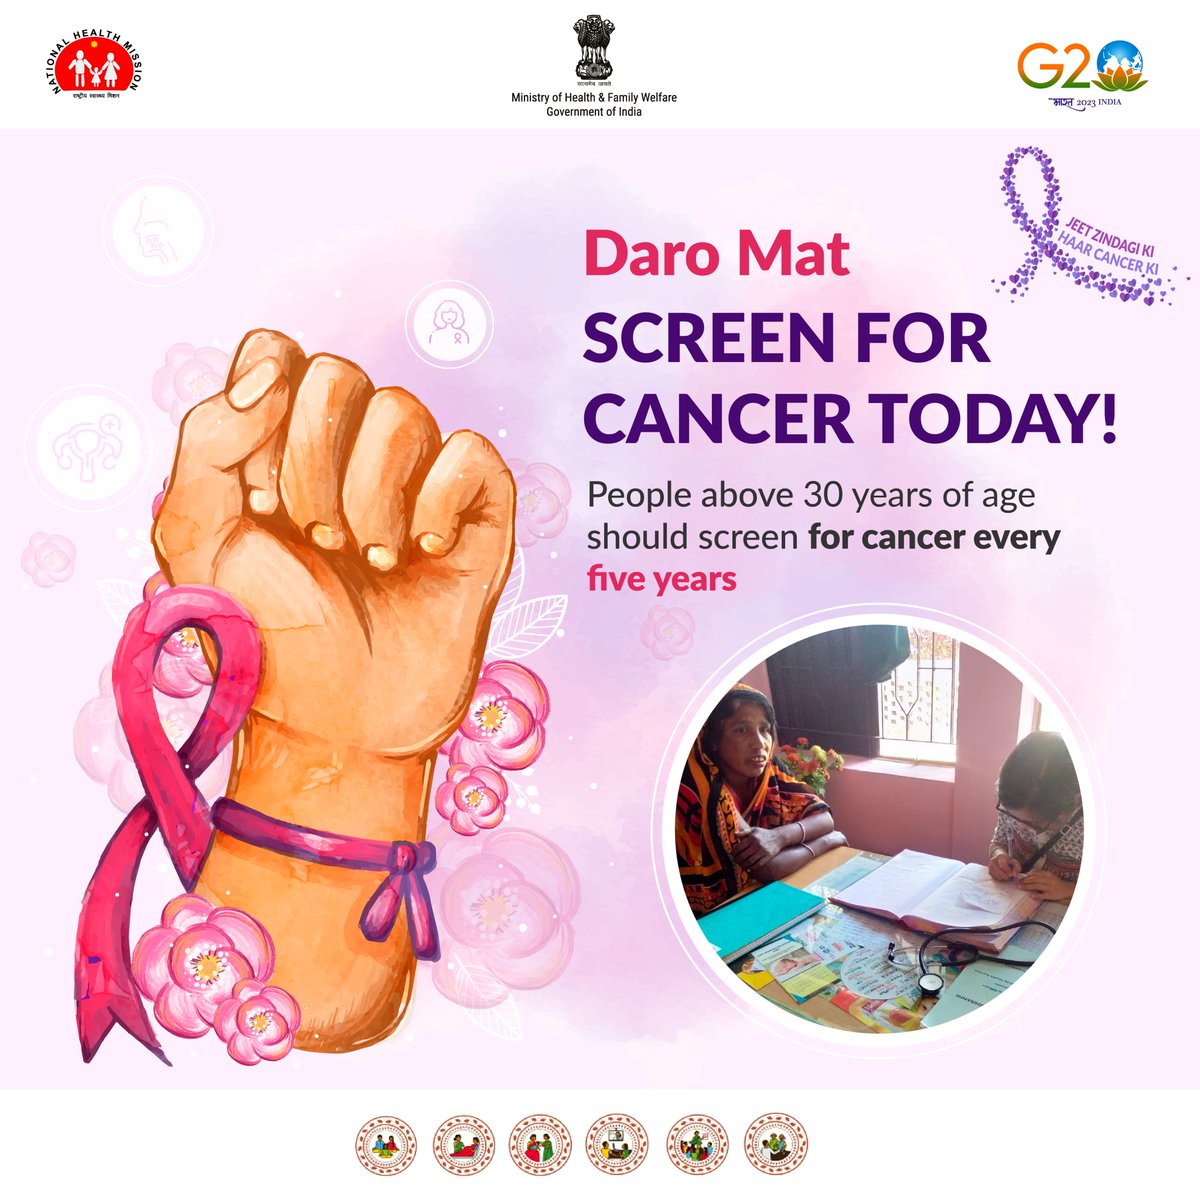 Screening for Cancer is the first step towards prevention. Visit the nearest #AB_HealthandWellnessCentre to screen for breast, oral, and cervical Cancer for FREE. @mansukhmandviya @DrBharatippawar @PMOIndia @MoHFW_INDIA @mygovindia @NITIAayog